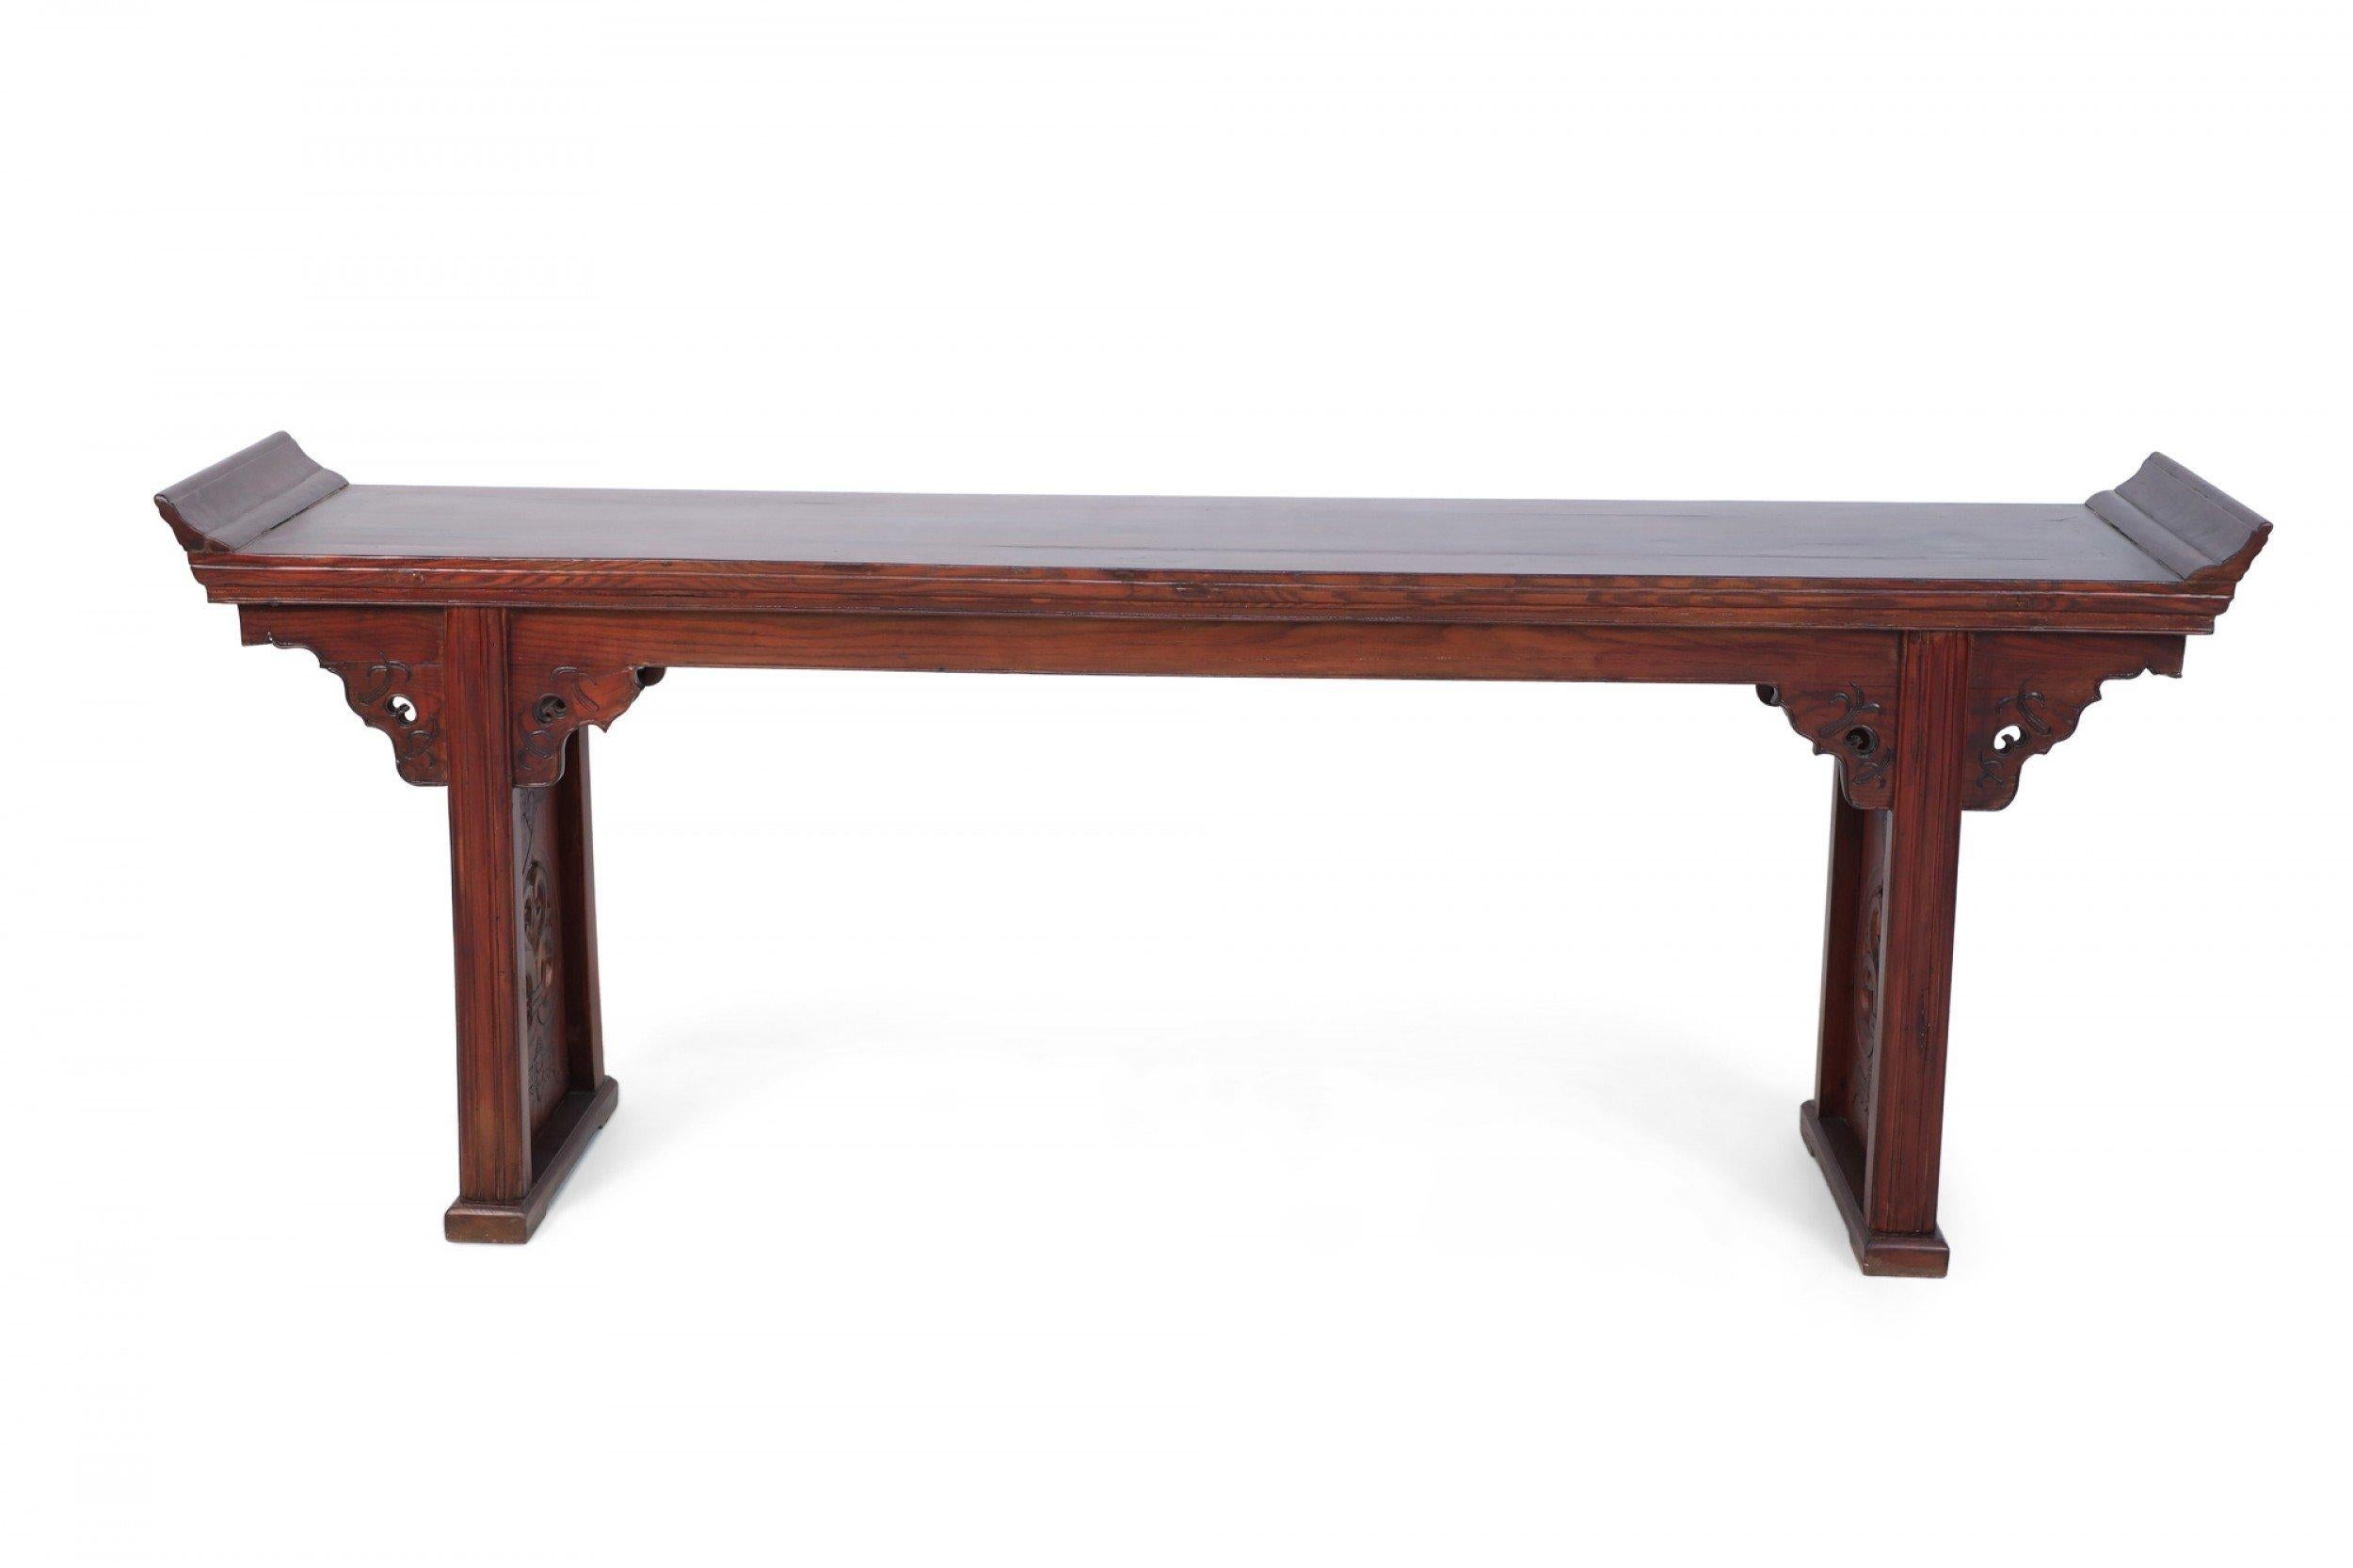 Chinese hardwood altar / console table accented with ornately carved and pierced spandrels and recessed legs and topped with a surface bearing gently sloping sides.